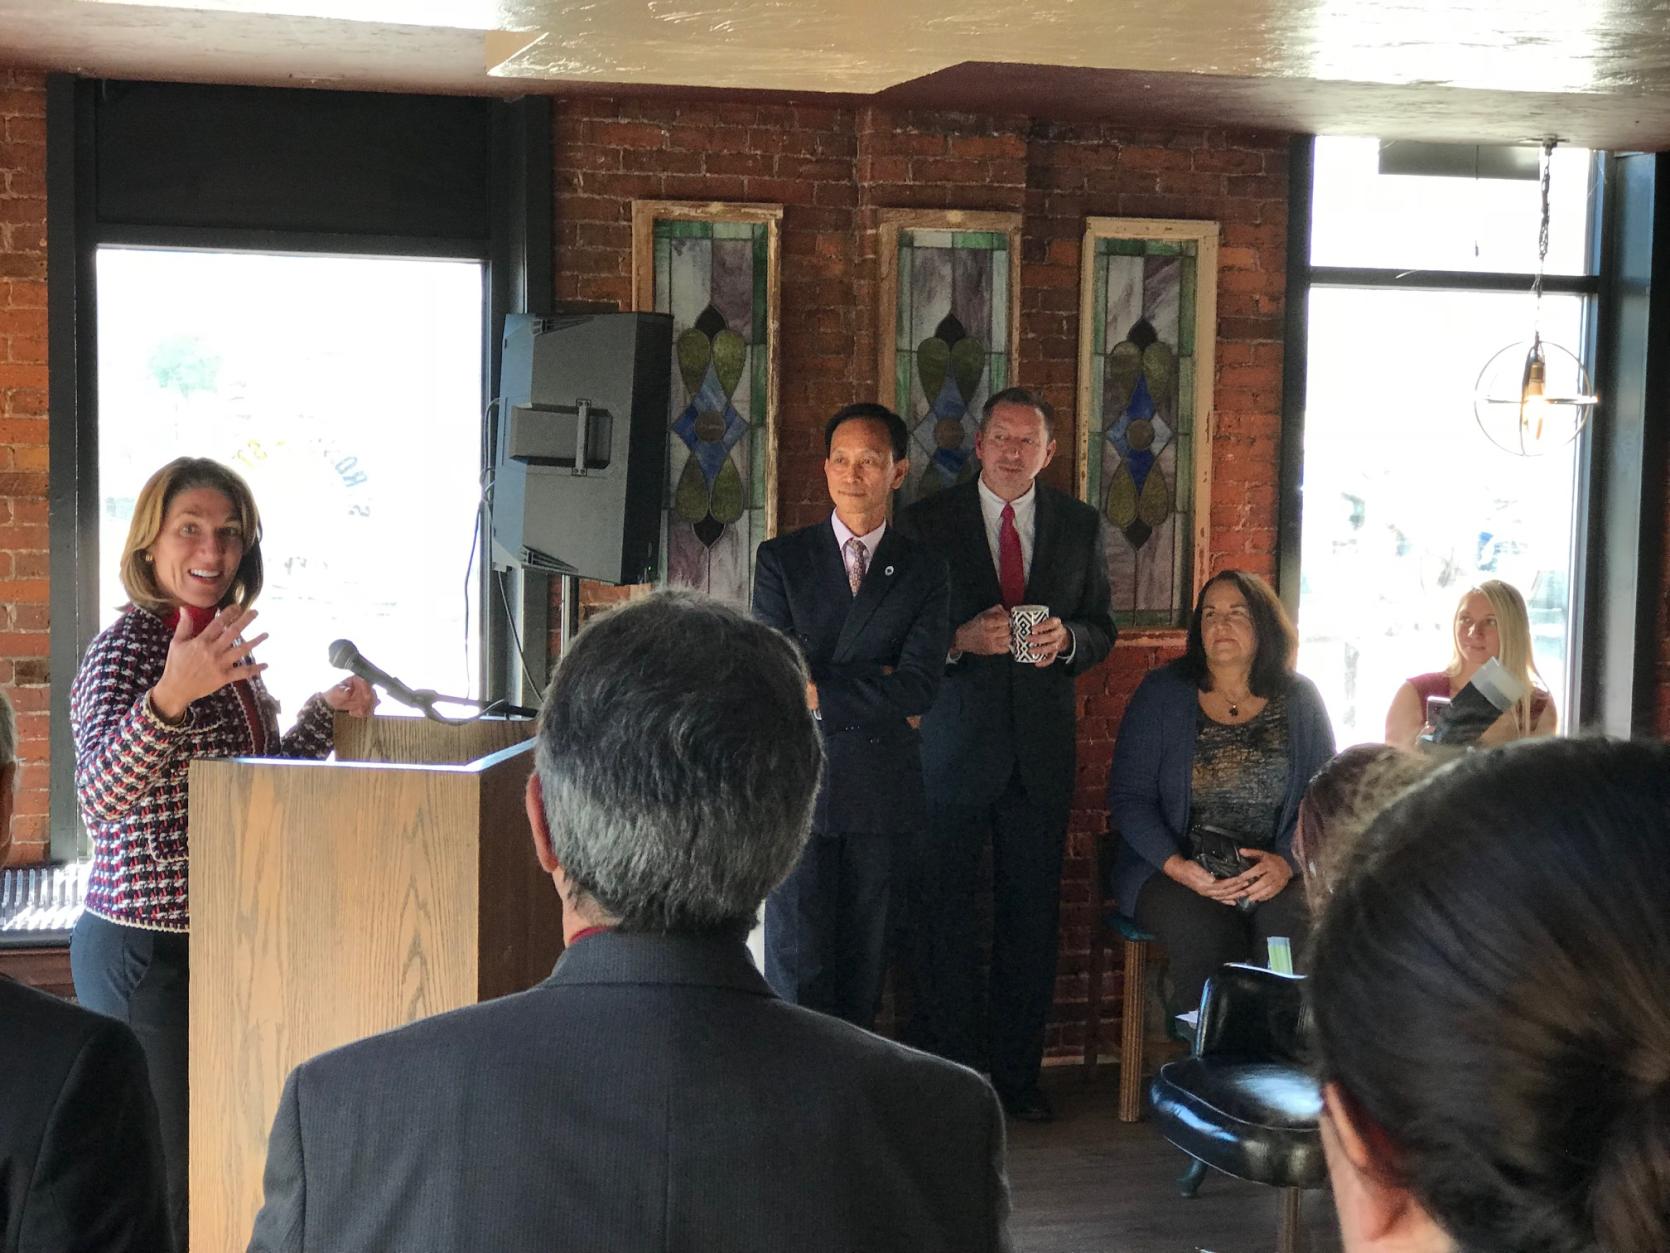 Lt. Governor Karyn Polito joined more than 40 small business owners, non-profit organizations, business development leaders and local elected officials in downtown Fitchburg to announce $2 million in grants in conjunction with Massachusetts Growth Capital Corporation (MGCC).